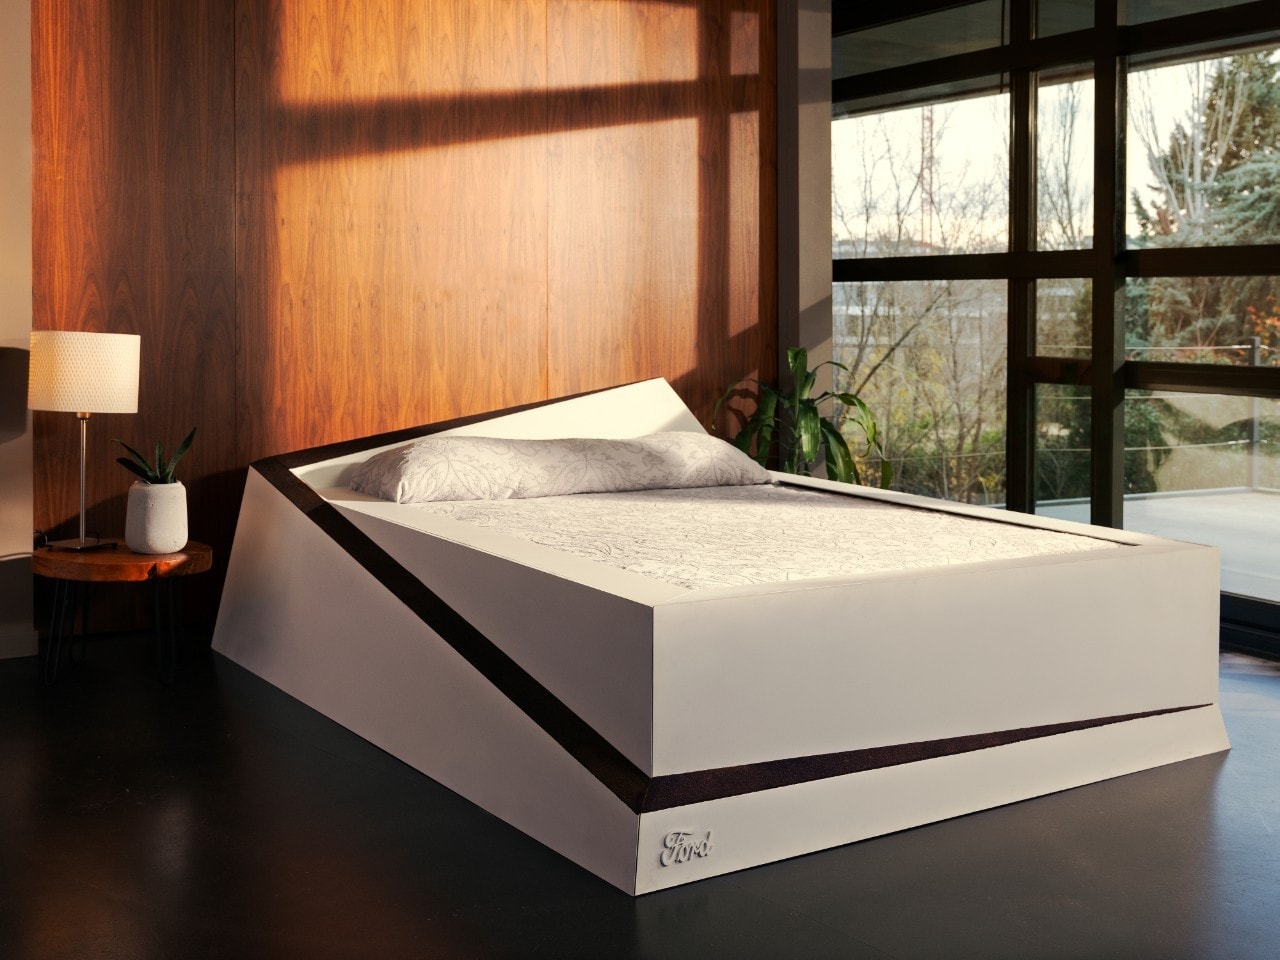 Smart Bed Rolls Selfish Sleepers Back into Place – Using Car Tech and a Conveyor Belt 